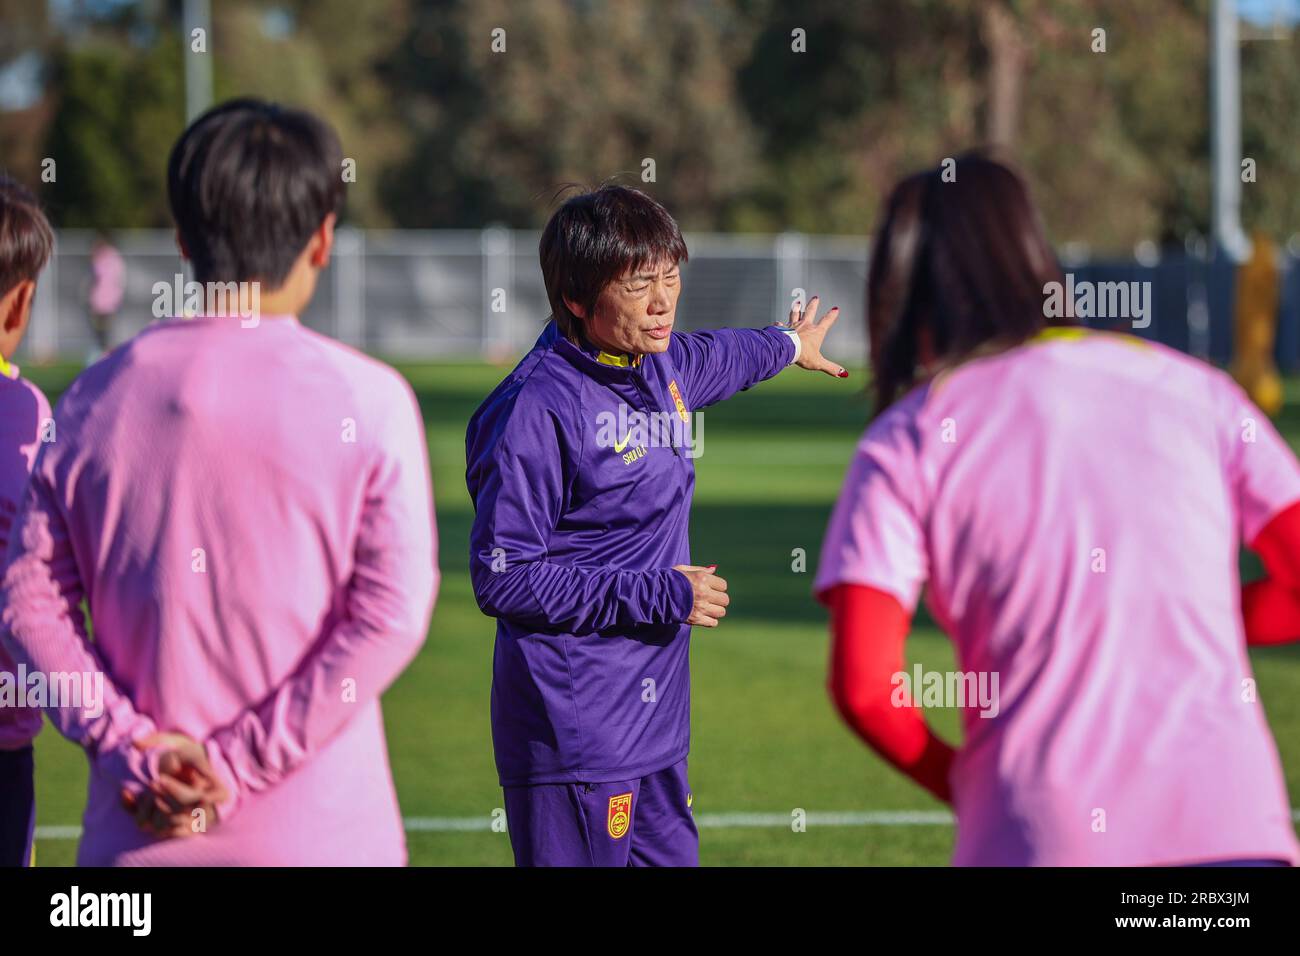 Adelaide, FIFA Women's World Cup in Adelaide of Australia. 11th July, 2023. Shui Qingxia, head coach of China, talks to the players during a training session prior to the 2023 FIFA Women's World Cup in Adelaide of Australia, July 11, 2023. Credit: Xie Sida/Xinhua/Alamy Live News Stock Photo